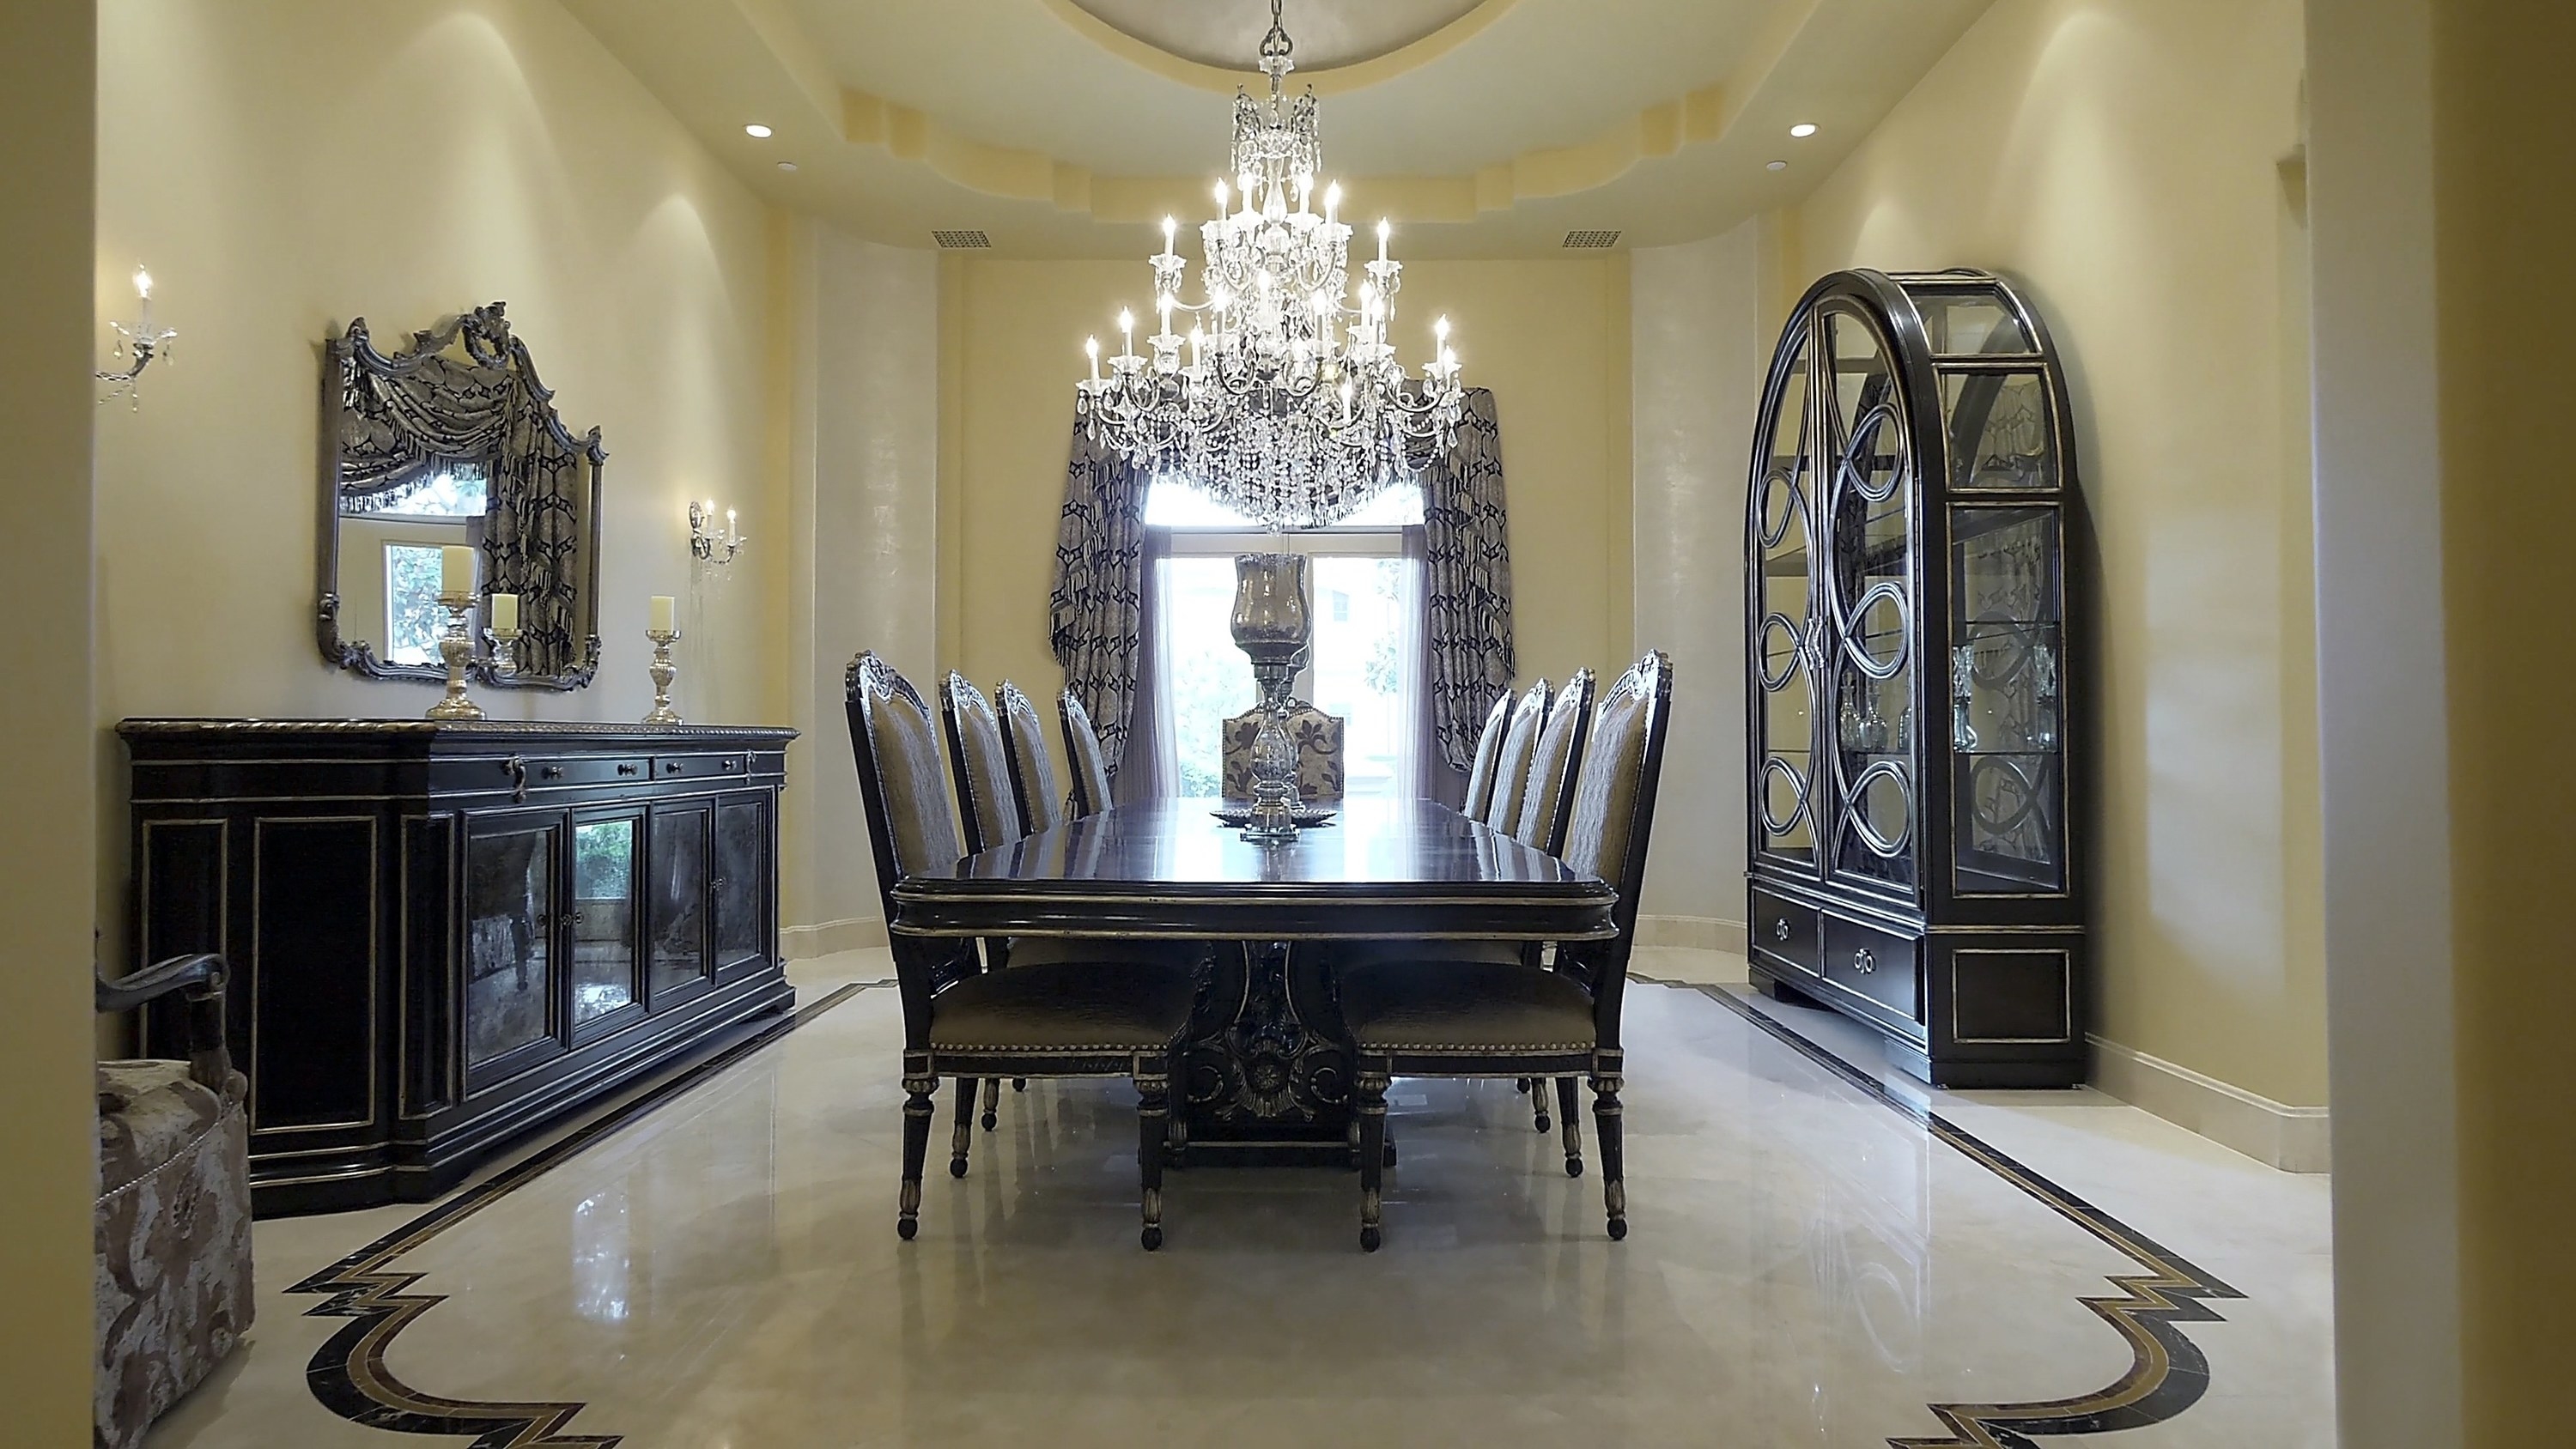 The dining room has an ornate chandelier and shiny marble floors